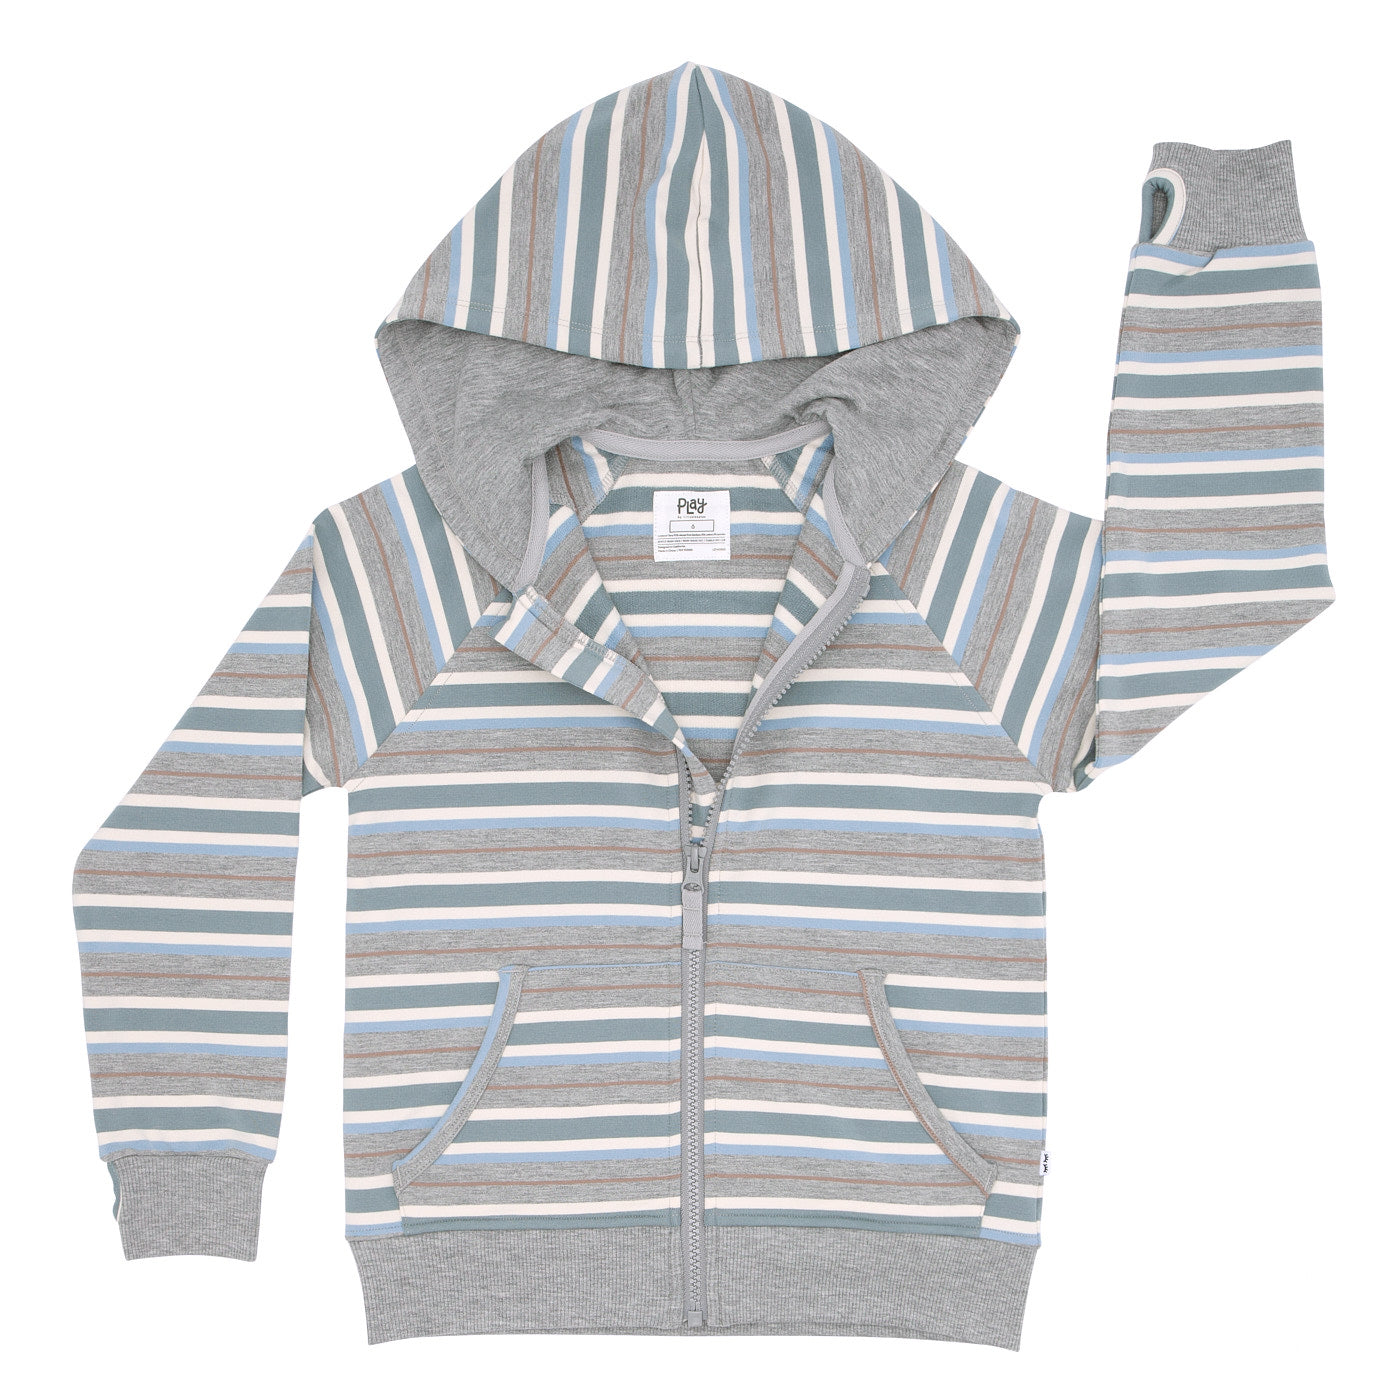 Flat lay image of a Vintage Teal Stripes zip hoodie with the zipper partially unzipped